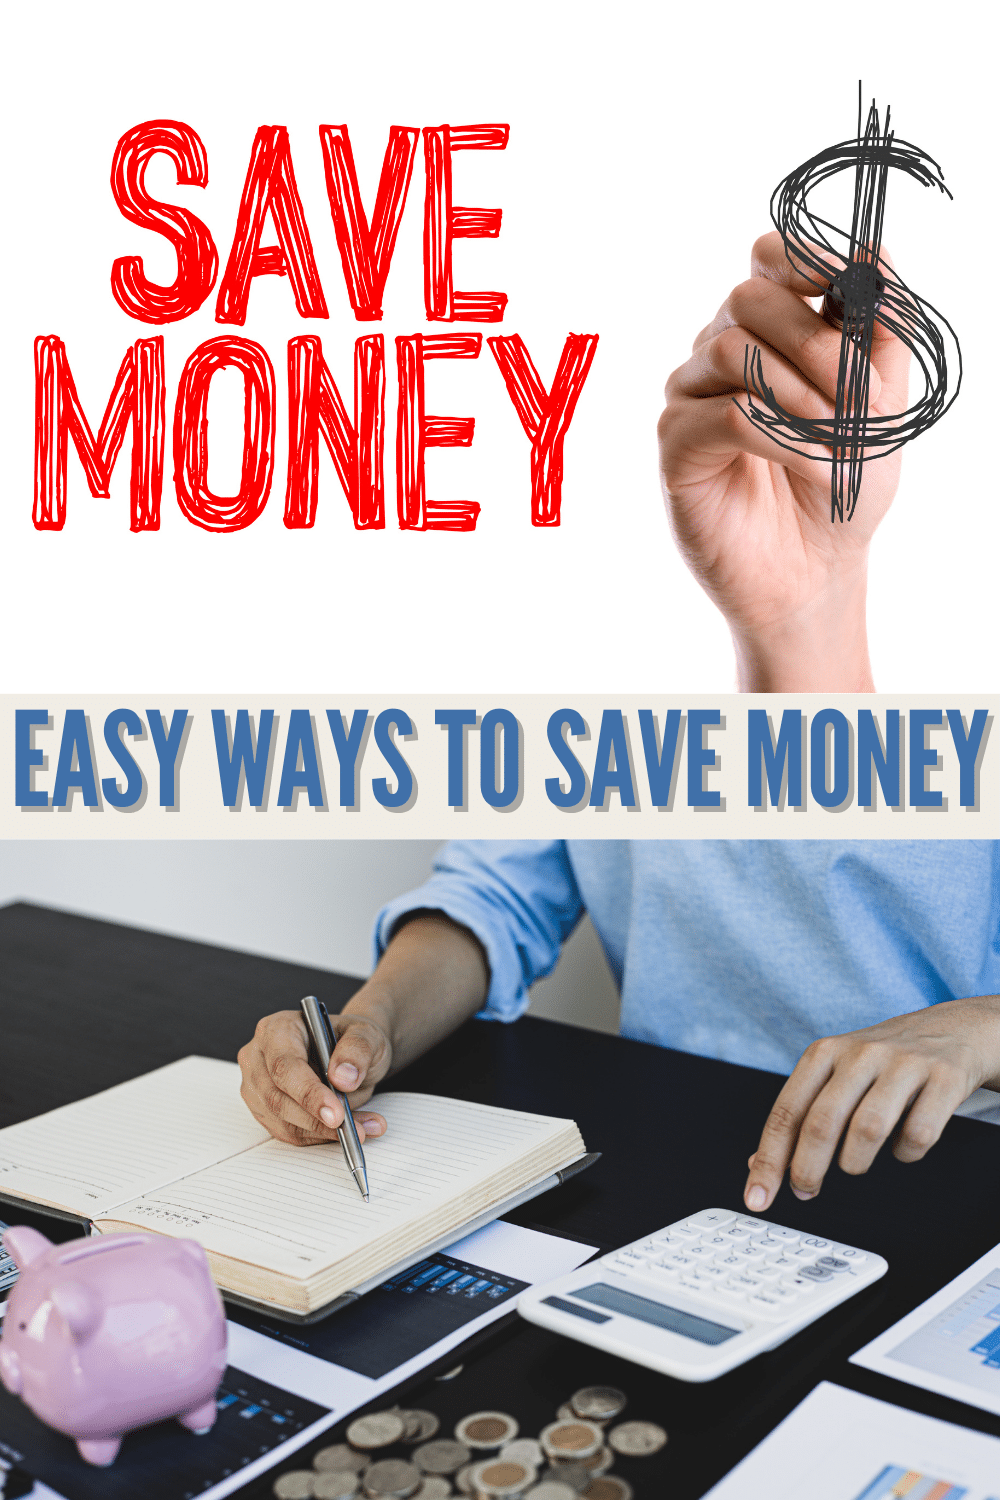 Easy ways to save money you can start using right now without making dramatic changes to your lifestyle. #savings #money via @wondermomwannab